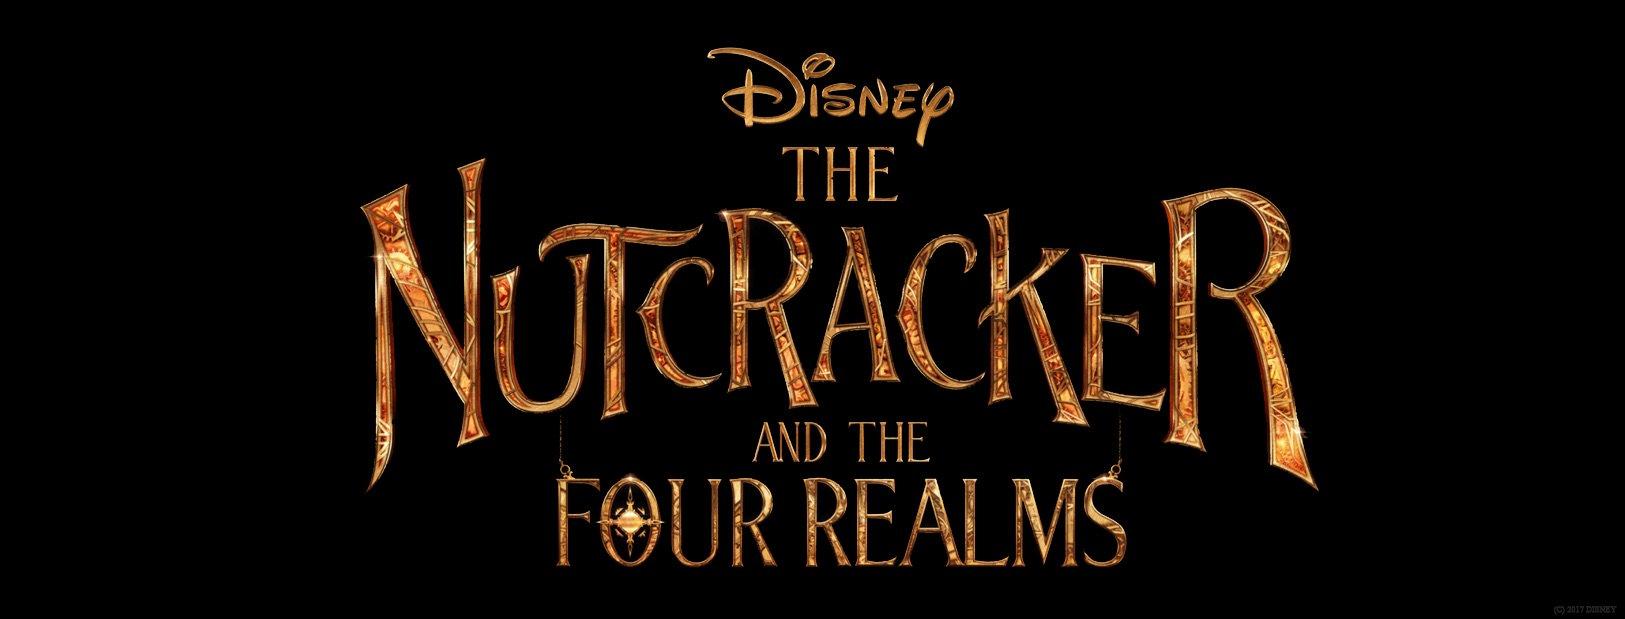 2017 Walt Disney Presents Logo - CLOCK: Disney presents the preview of The Nutcracker and the Four